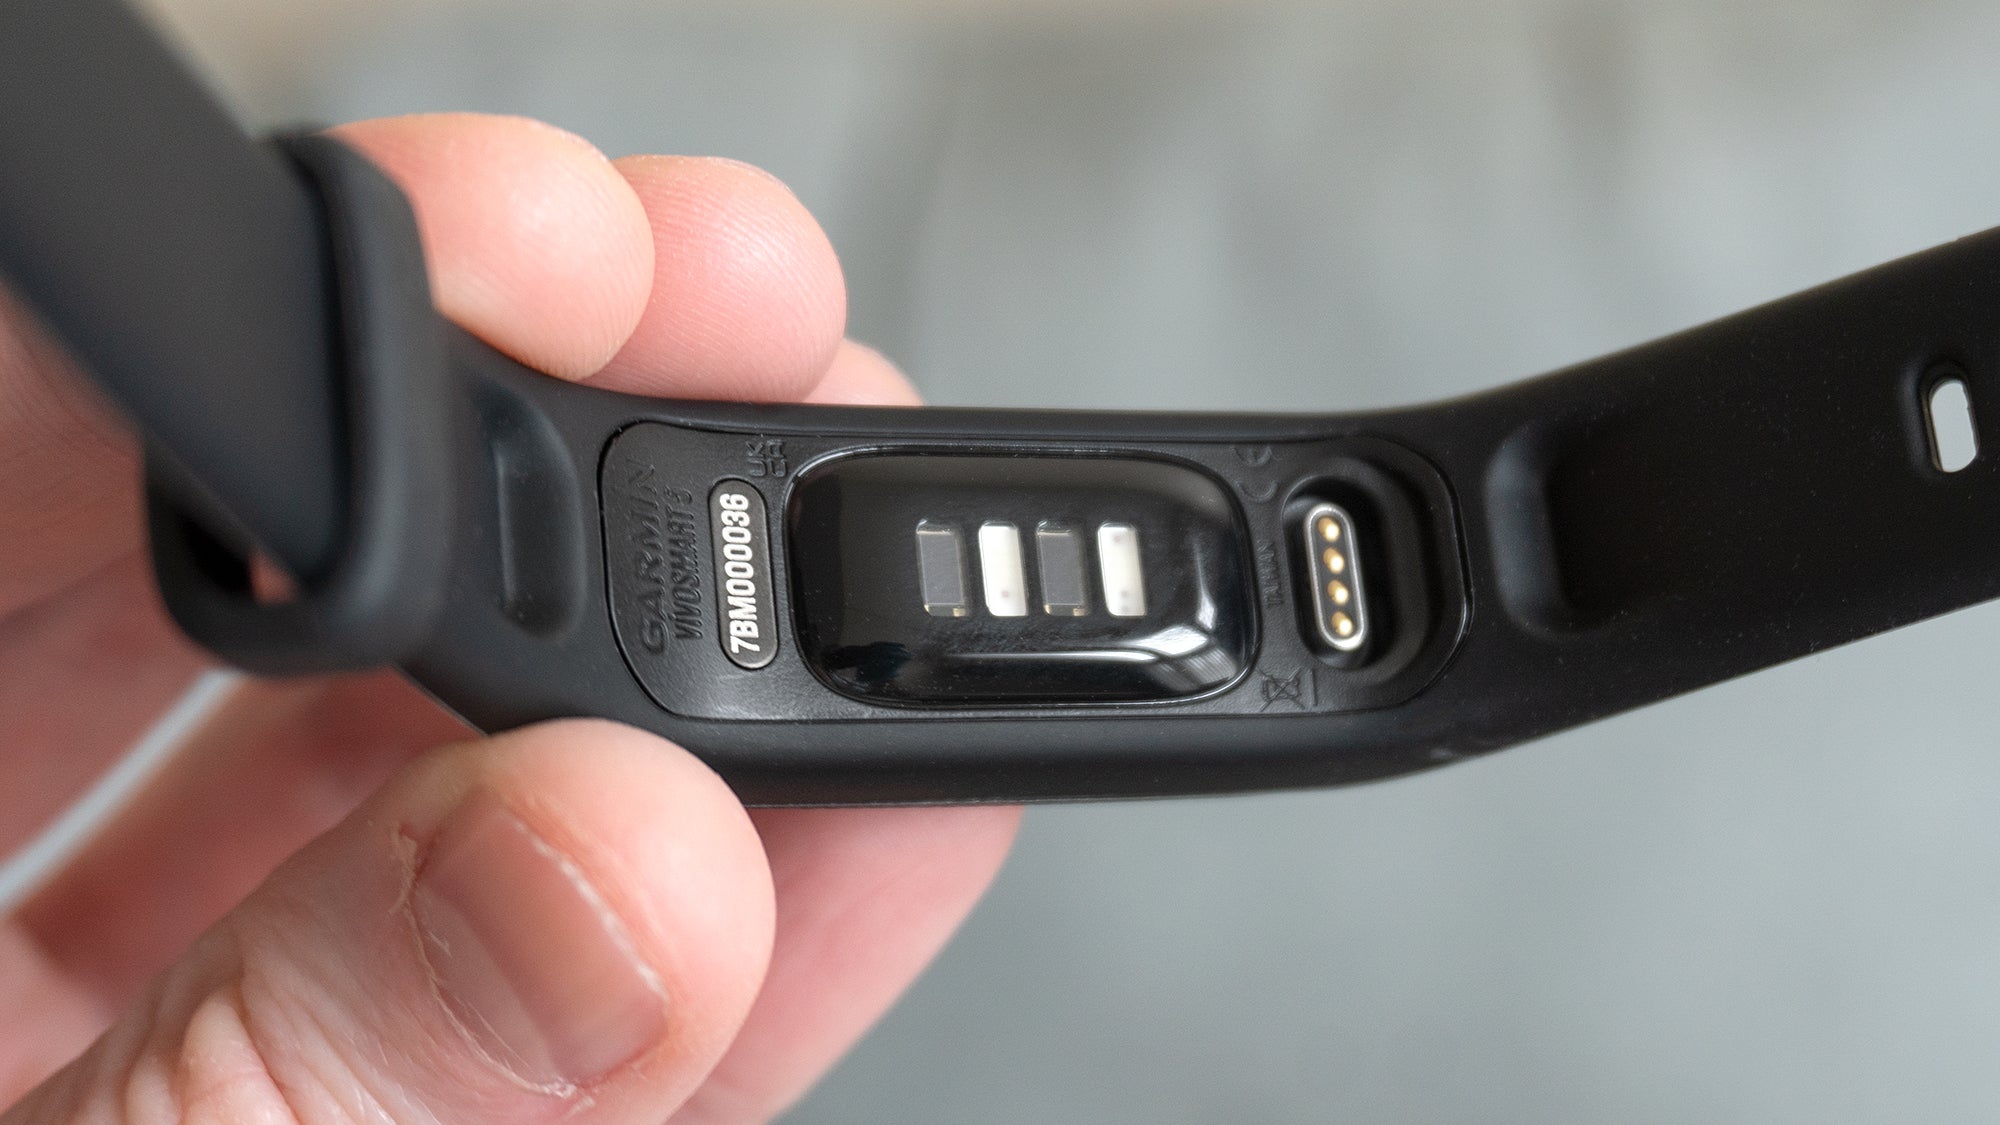 The vívosmart 5 features optical sensors for measuring heart rate and blood oxygen saturation, but still uses a proprietary charging cable which attaches to a connector on the back.